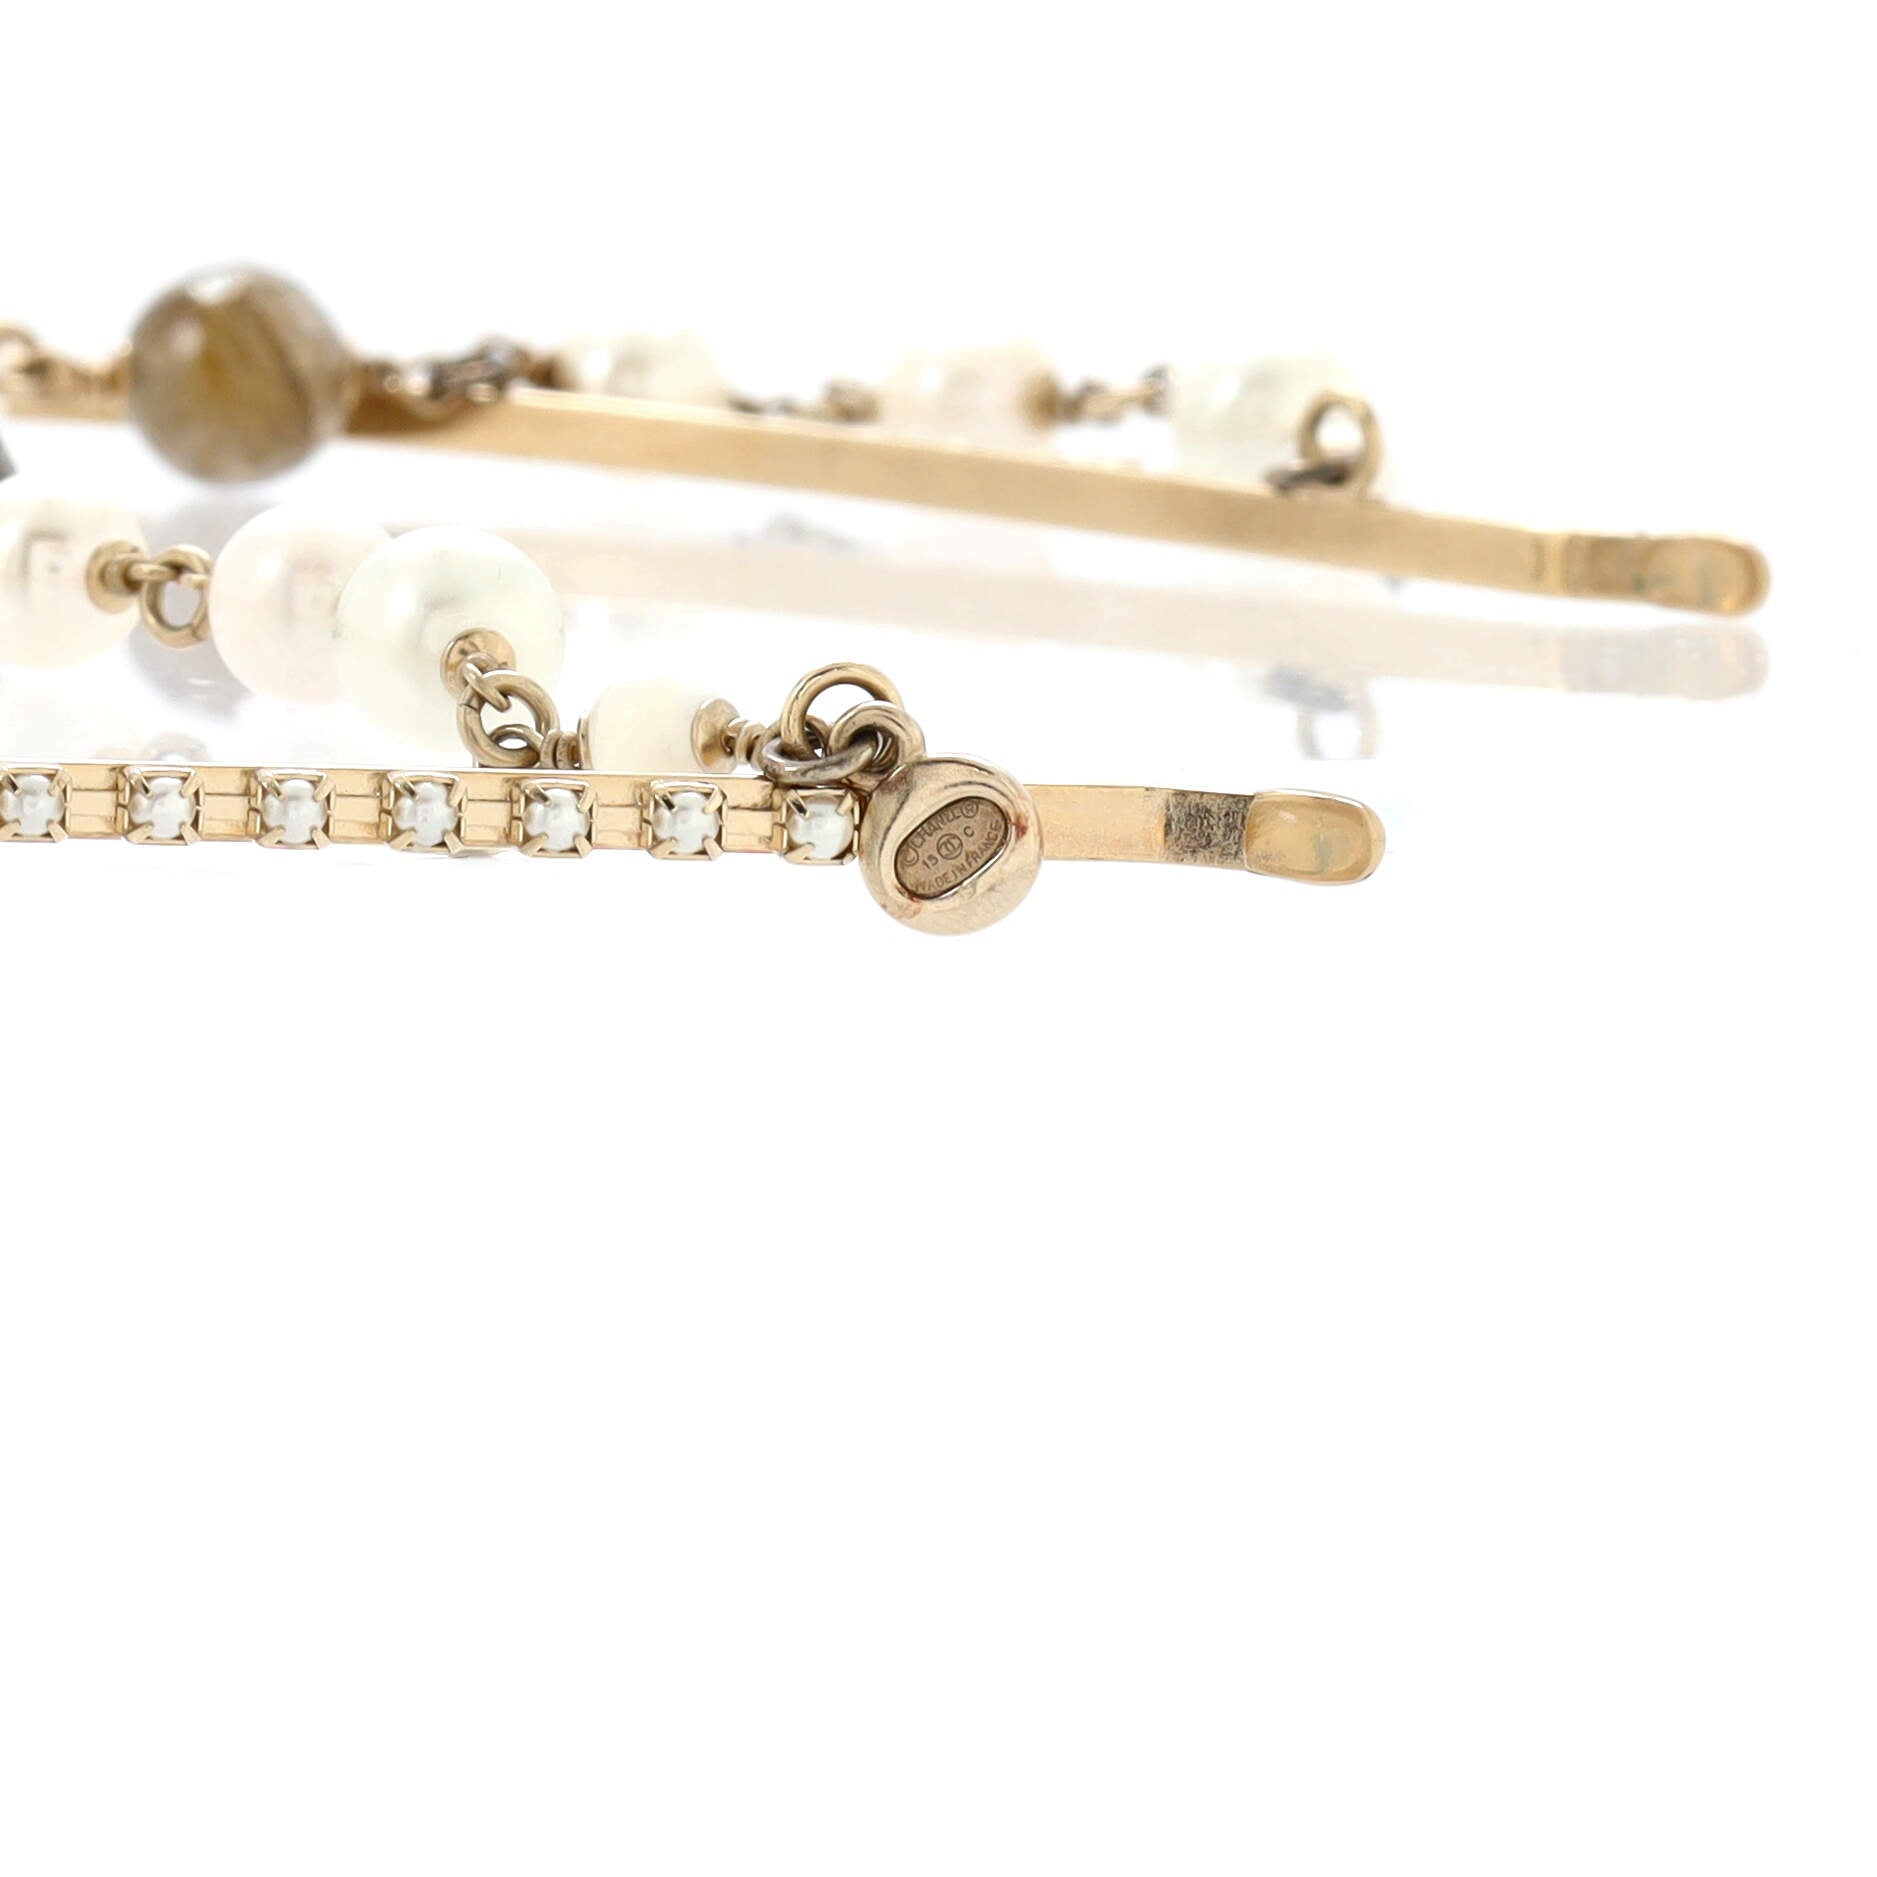 CHANEL Paris-Dubai Headband Metal with Crystals, Pearls and Beads